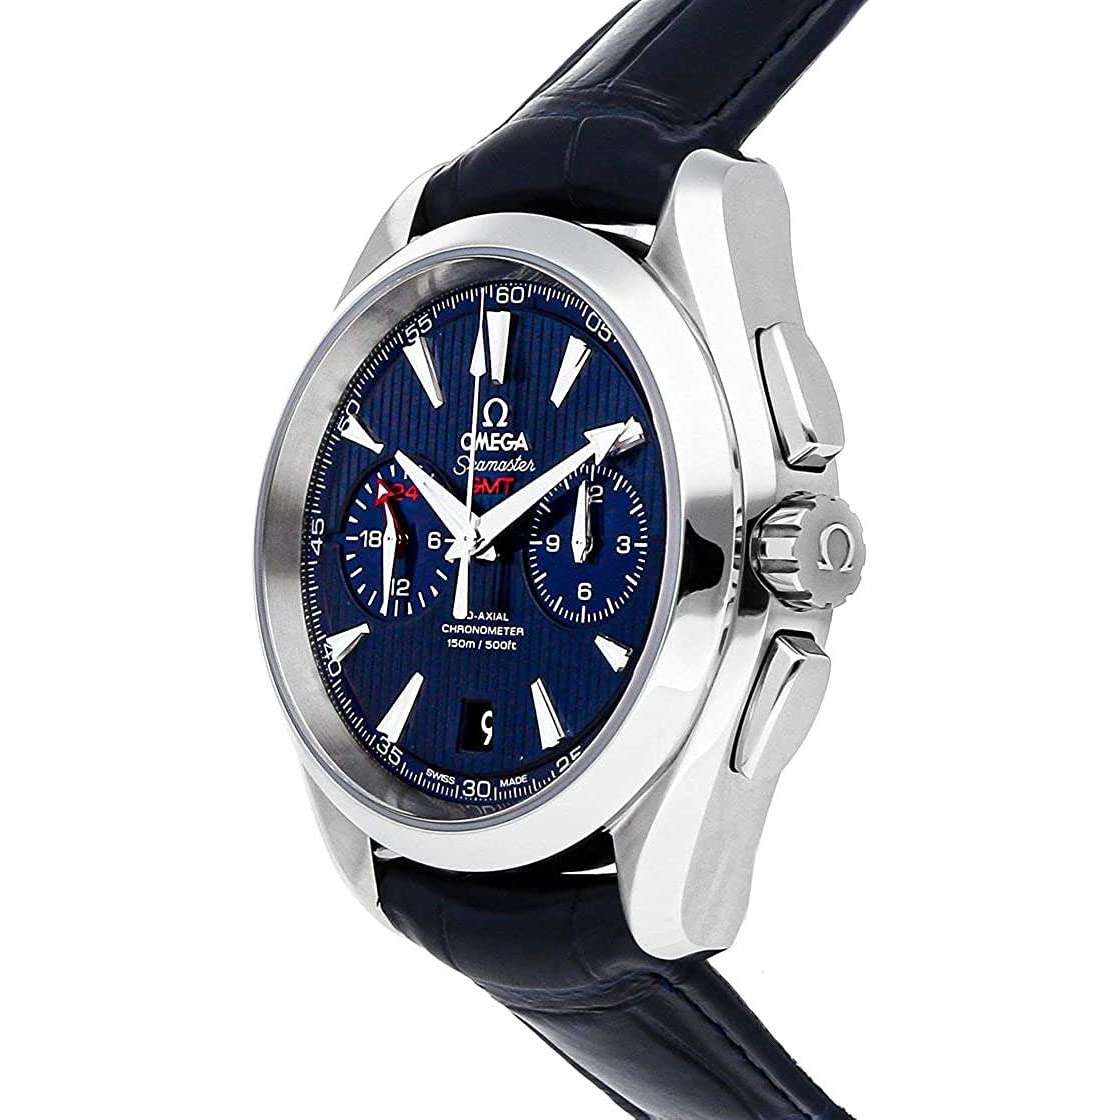 ROOK JAPAN:OMEGA SEAMASTER GMT CO-AXIAL CHRONOMETER 41 MM MEN WATCH 231.13.43.52.03.001,Luxury Watch,Omega